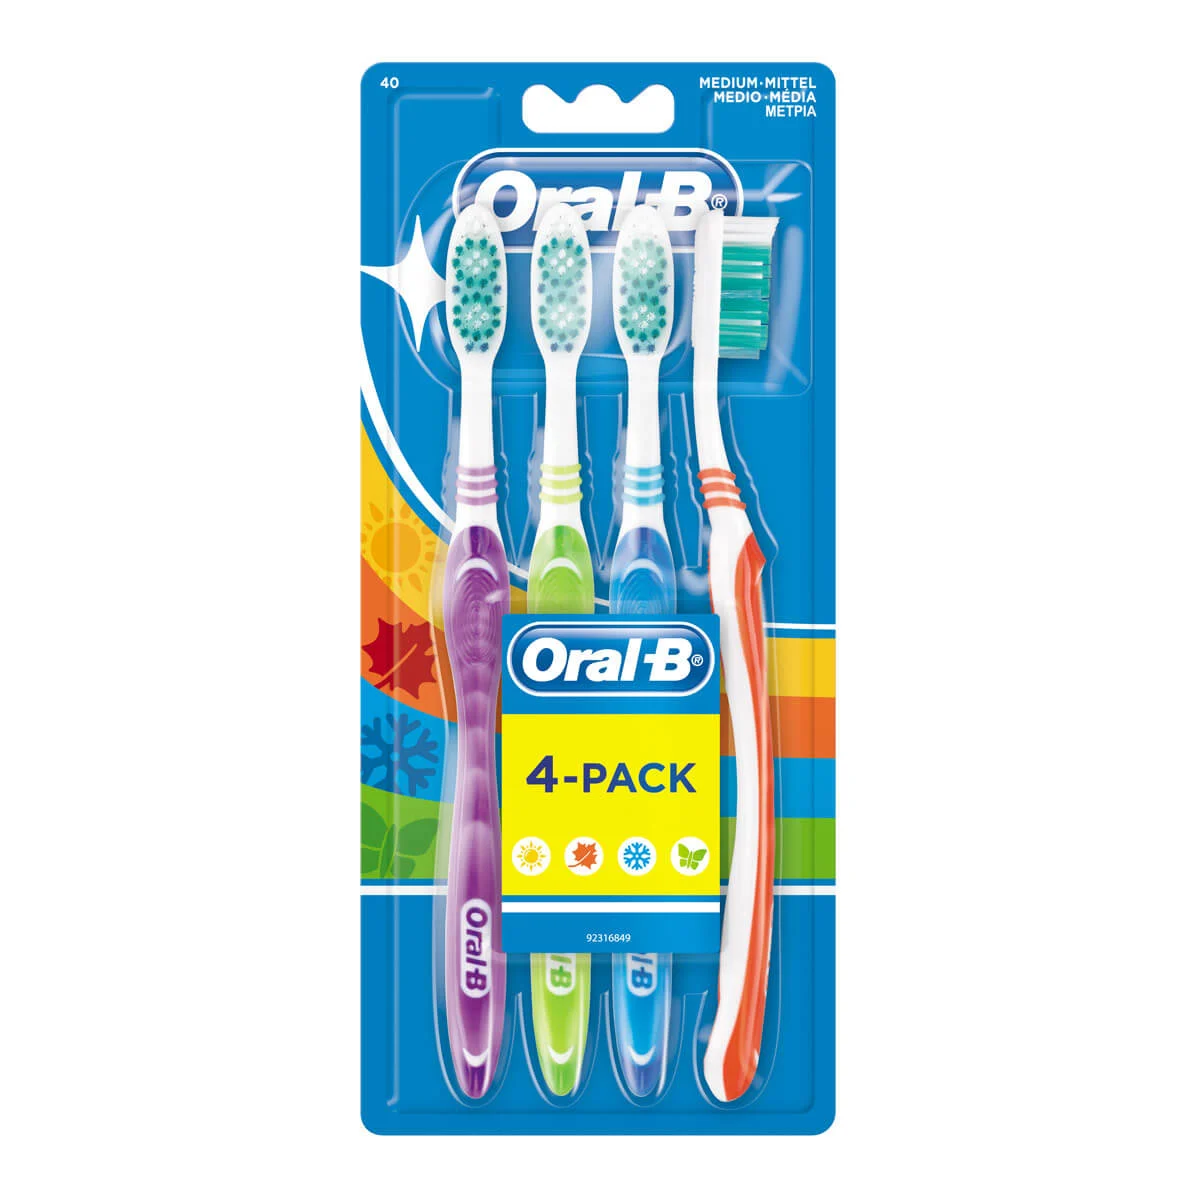 Oral-B 123 undefined